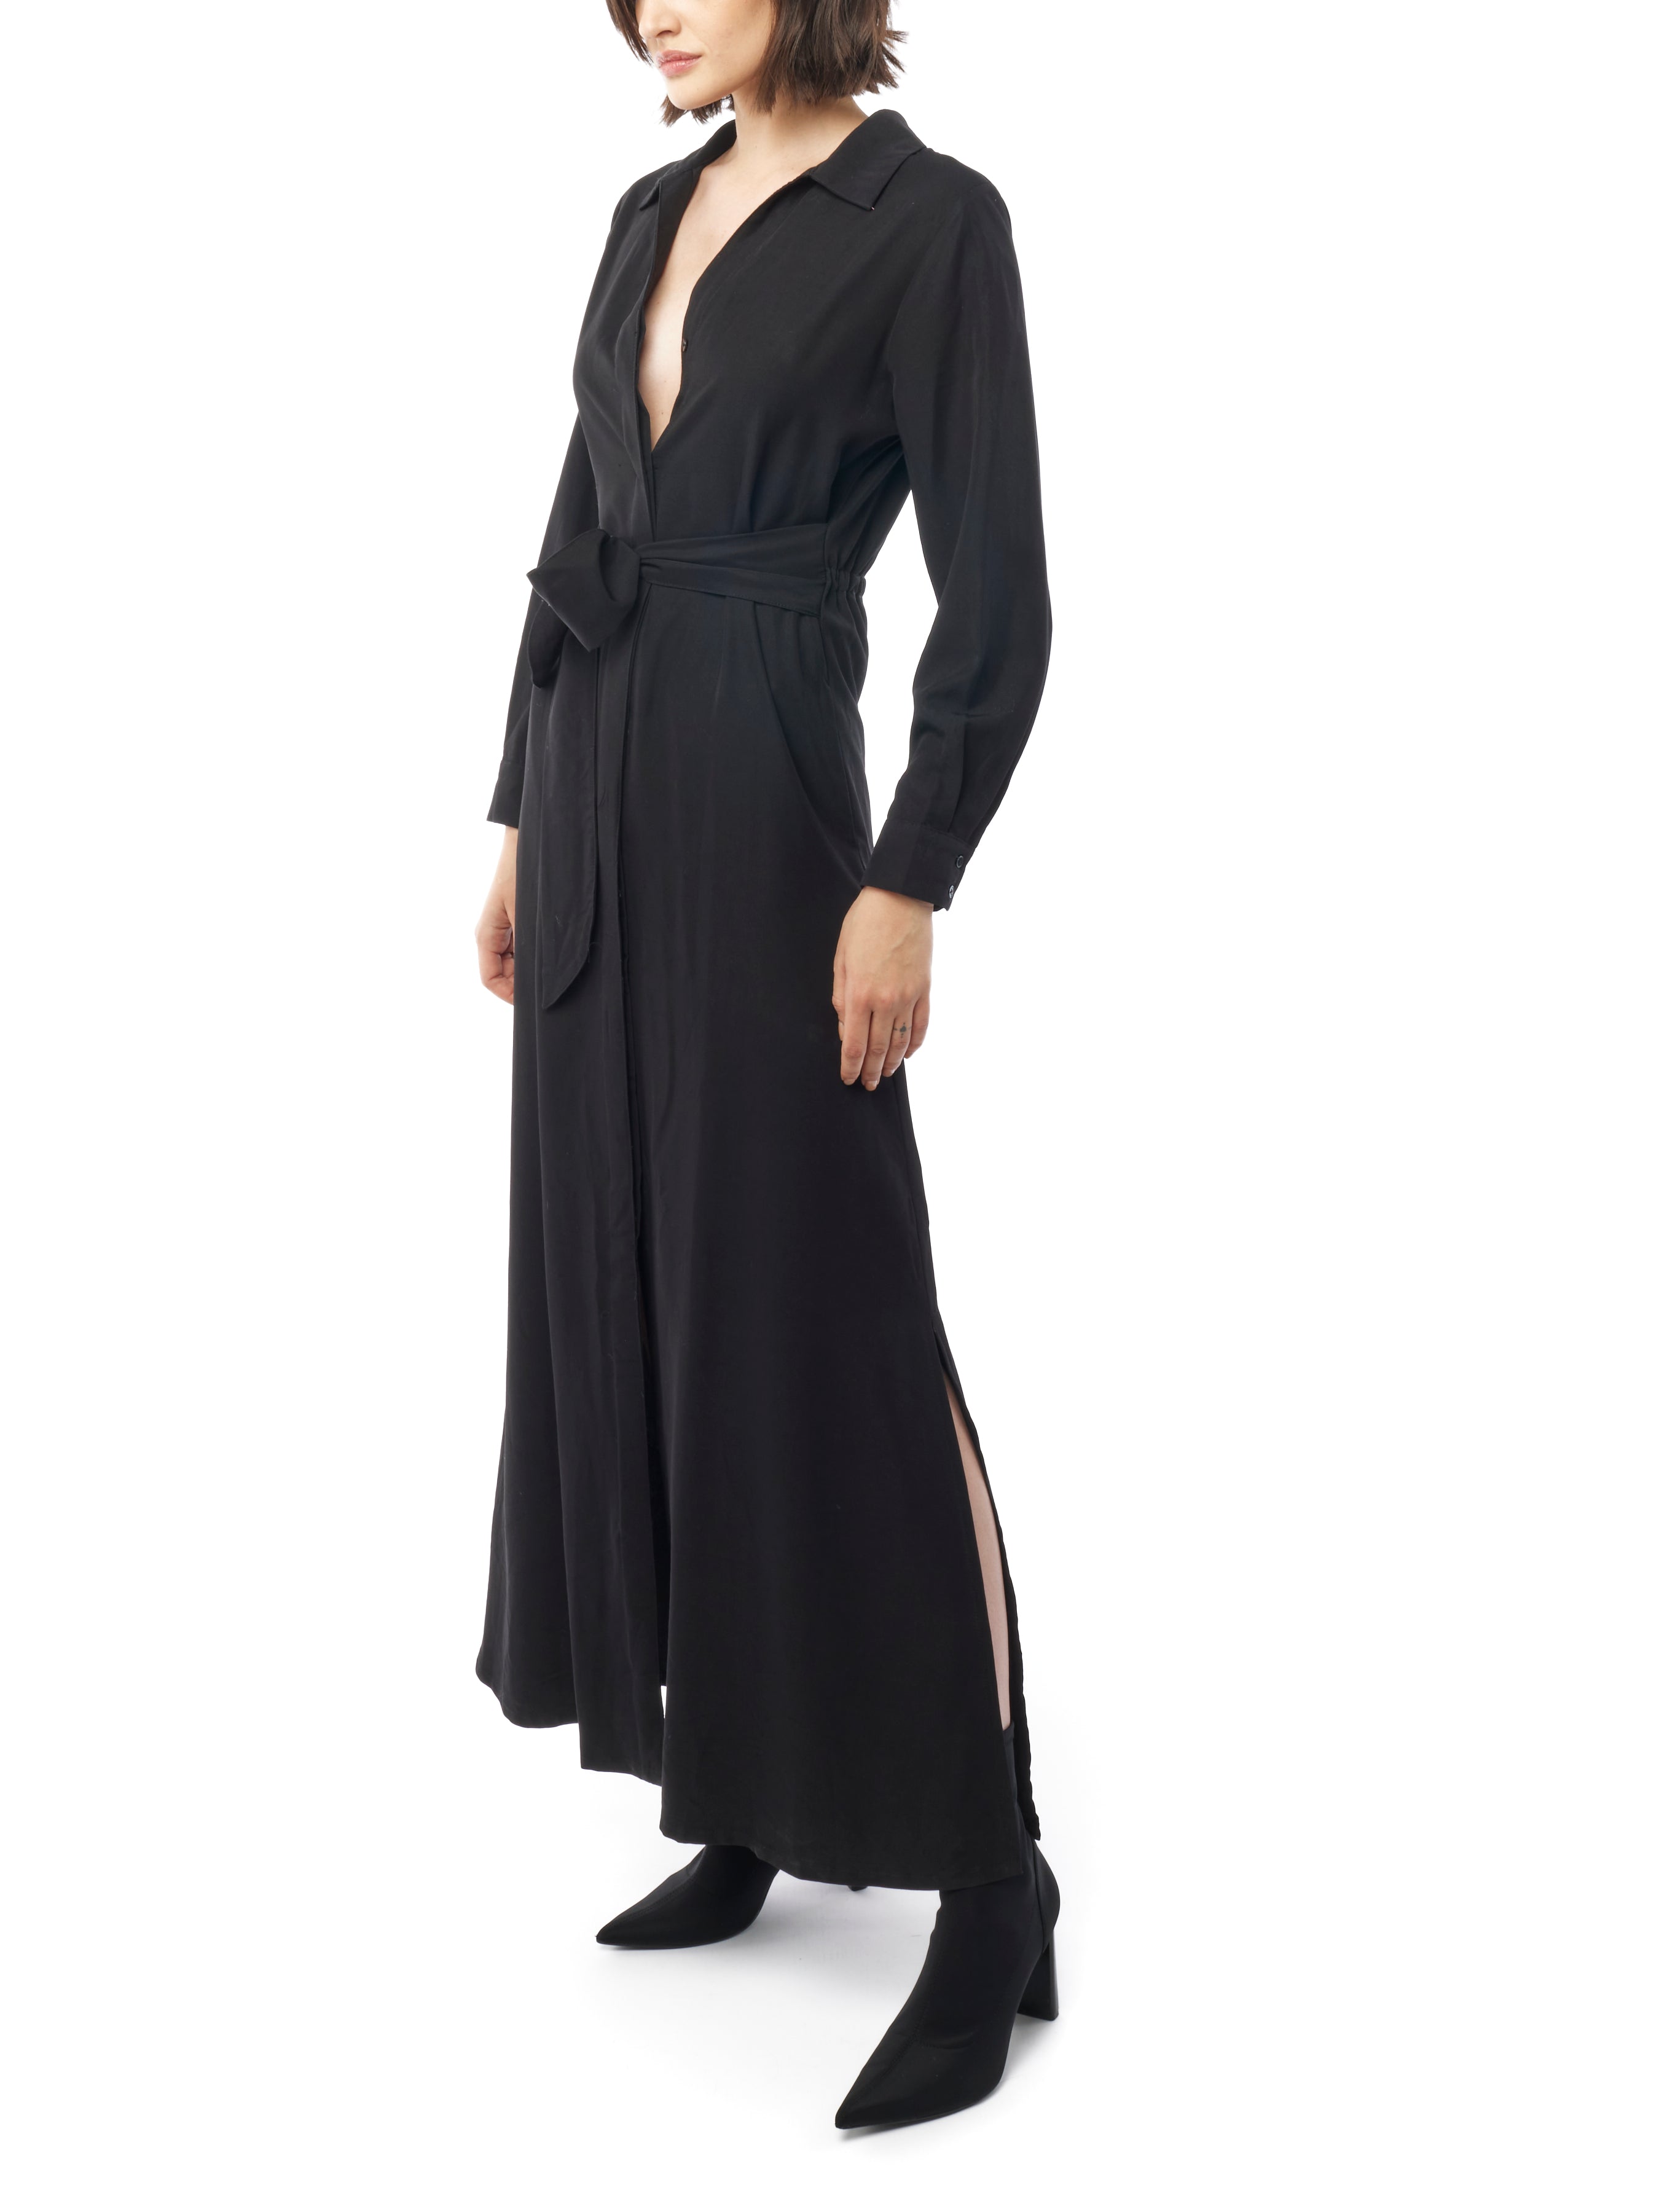 Long collared black dress with button down front, long cuffed sleeves and pockets. Side view